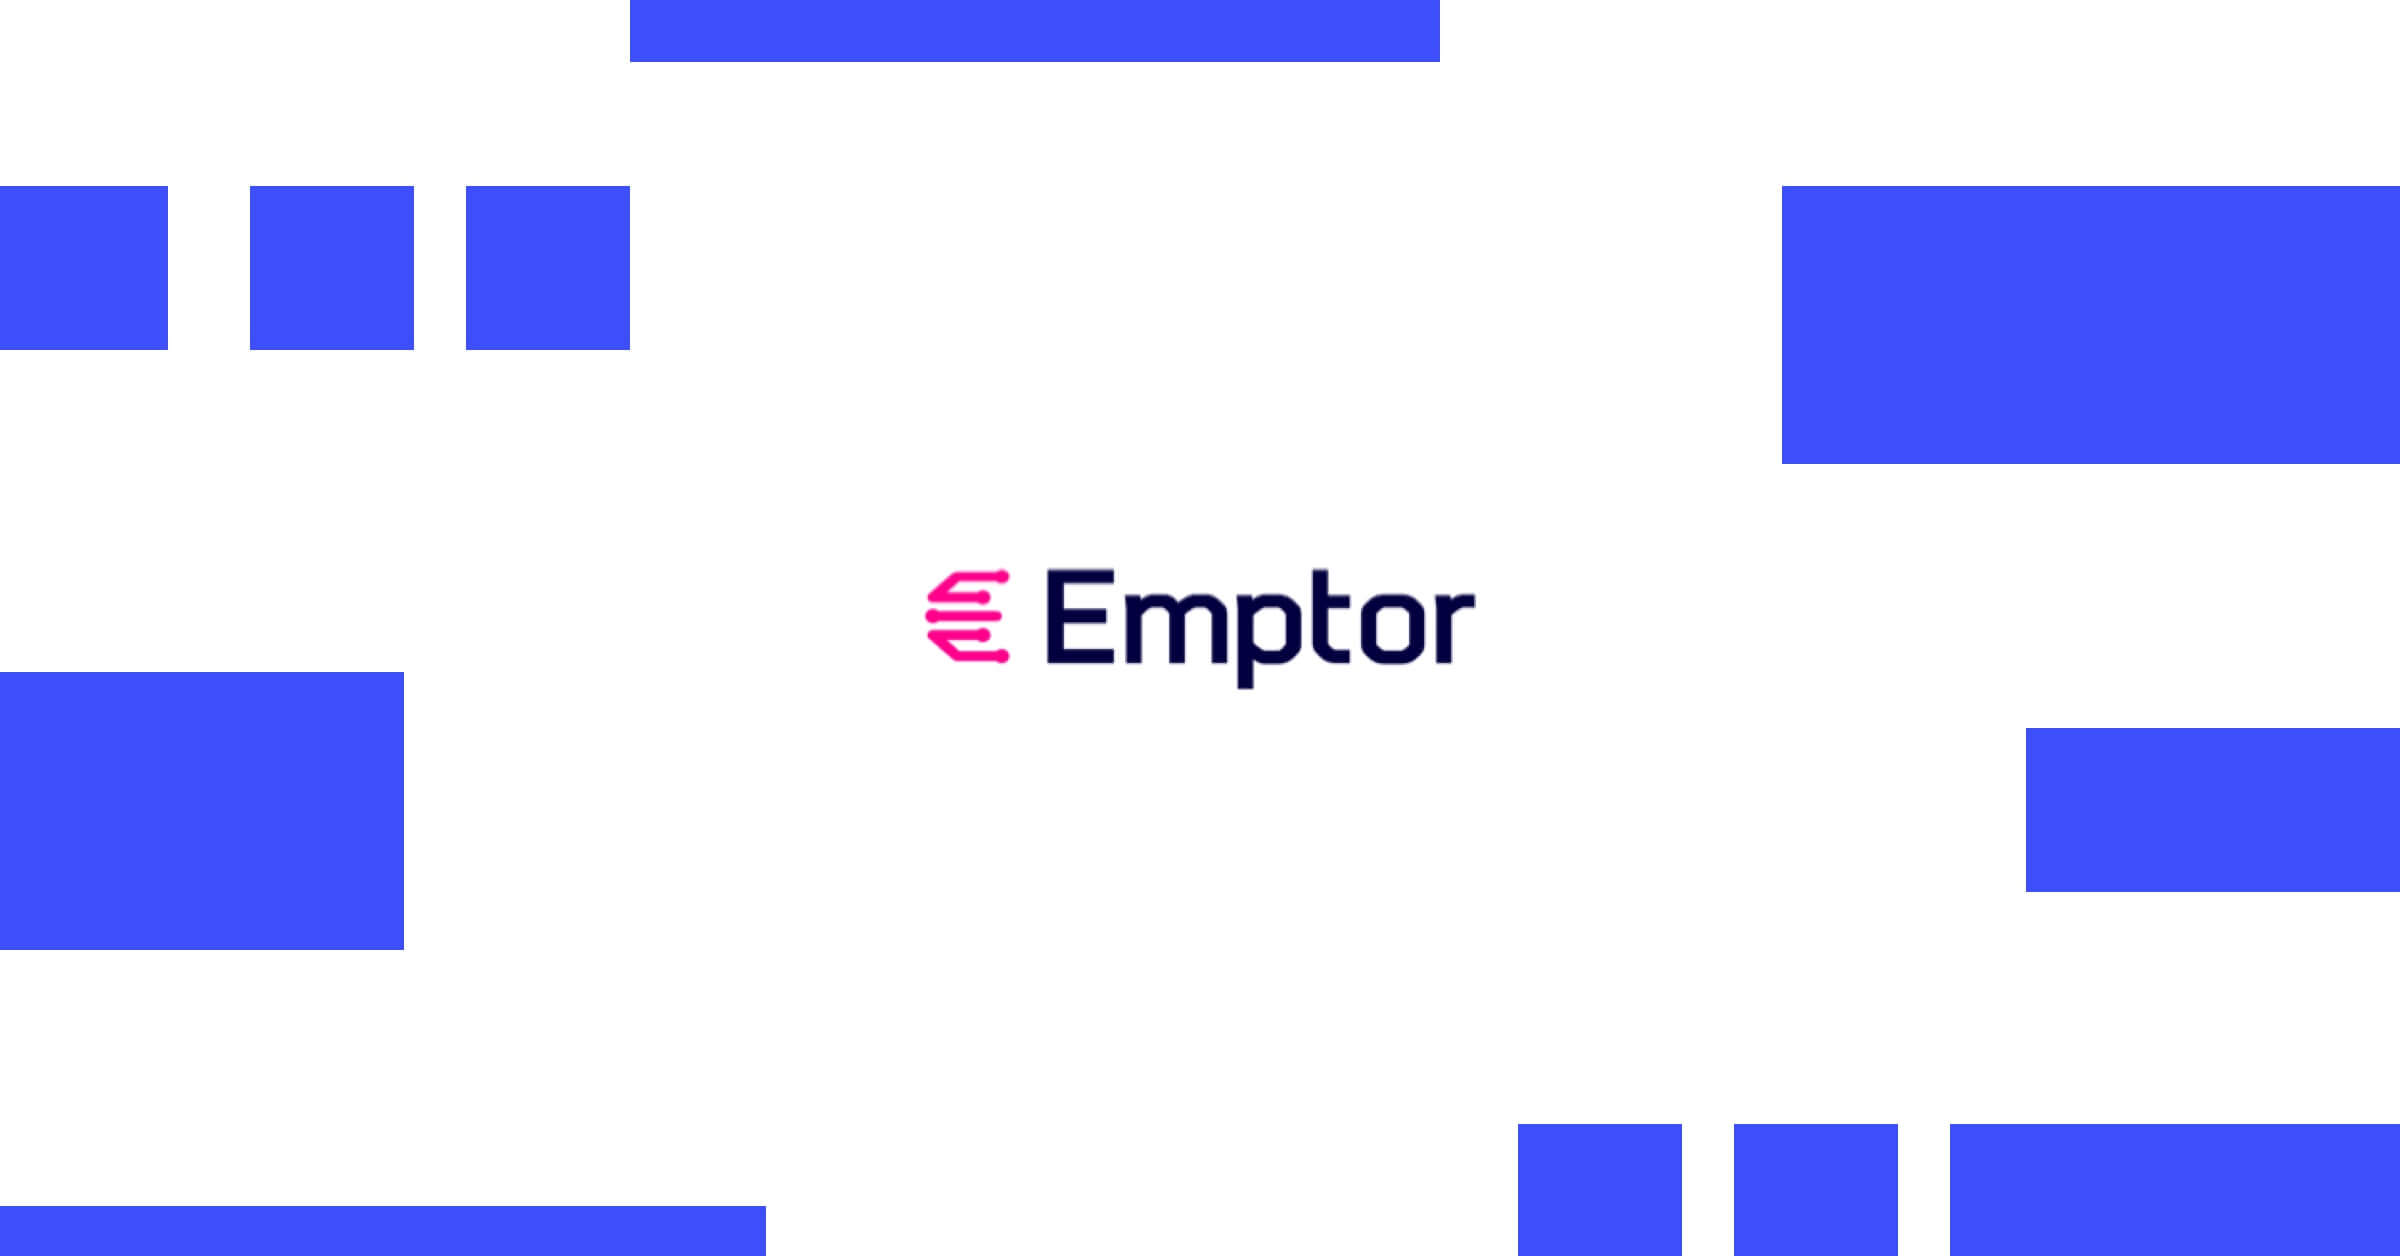 Helping Emptor’s 100% remote Workforce reach their full potential